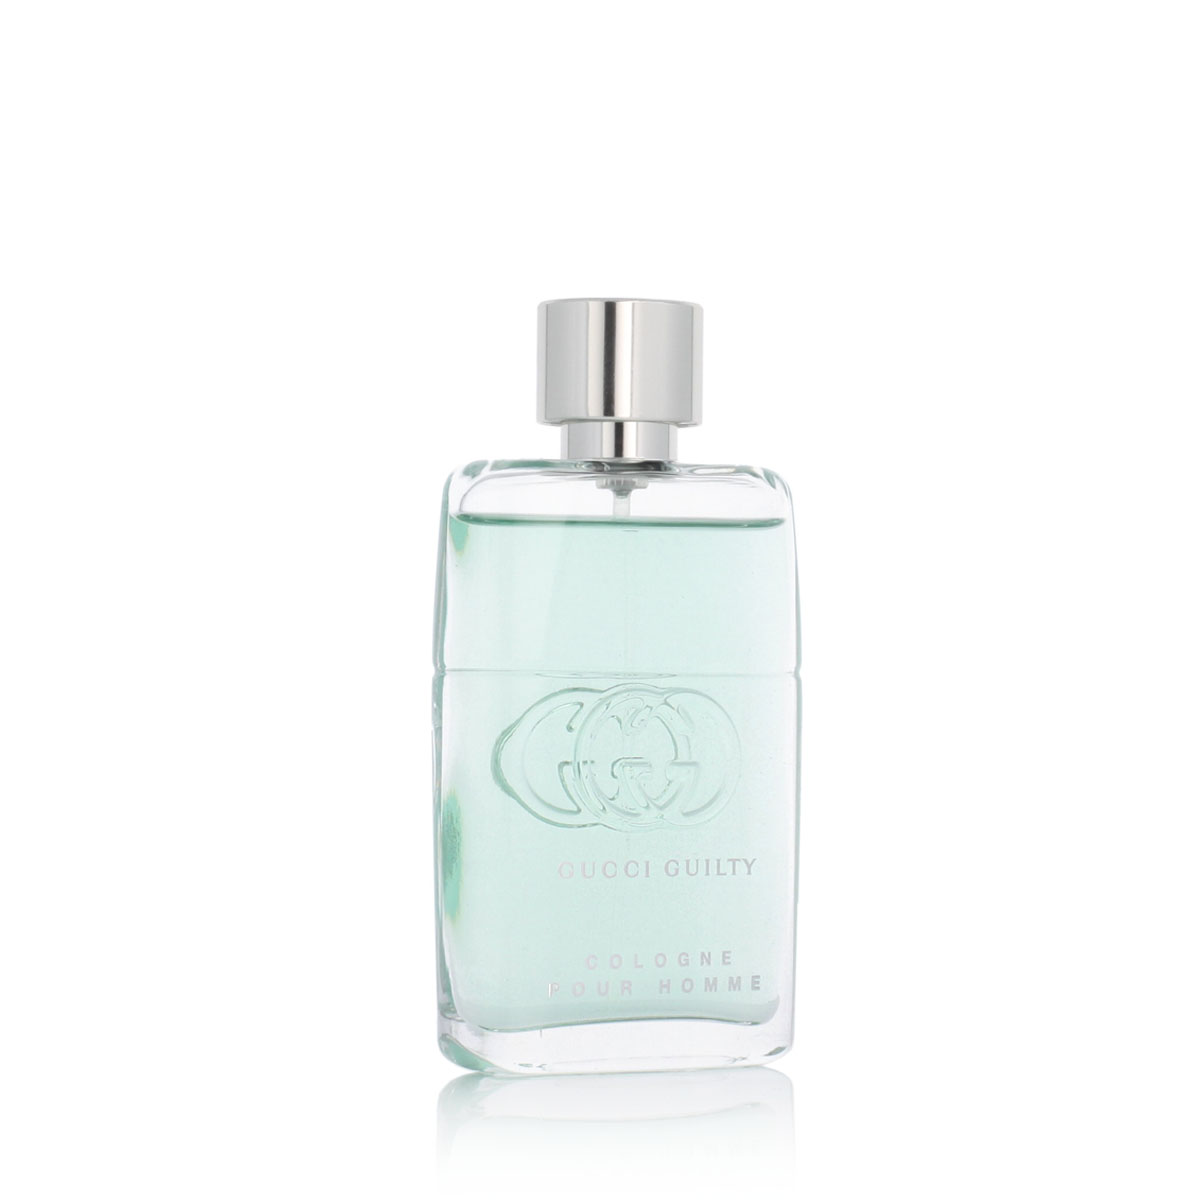 Gucci Guilty Cologne Pour Homme 50ml Kvepalai Vyrams EDT